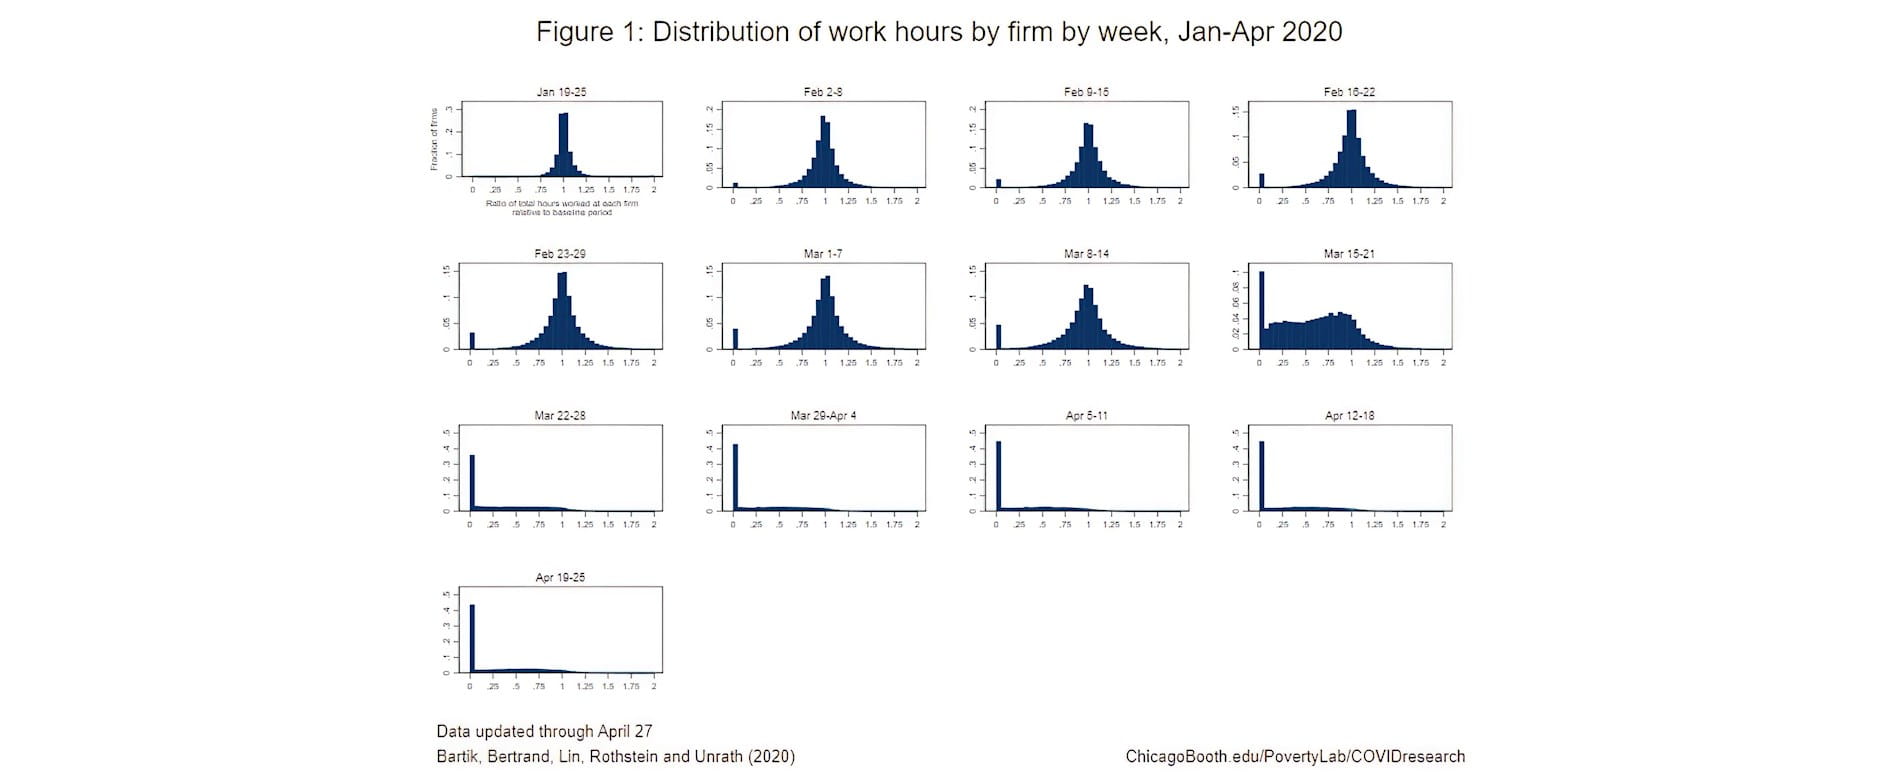 Figure 1: Distribution of work hours by firm by week, Jan-Apr 2020